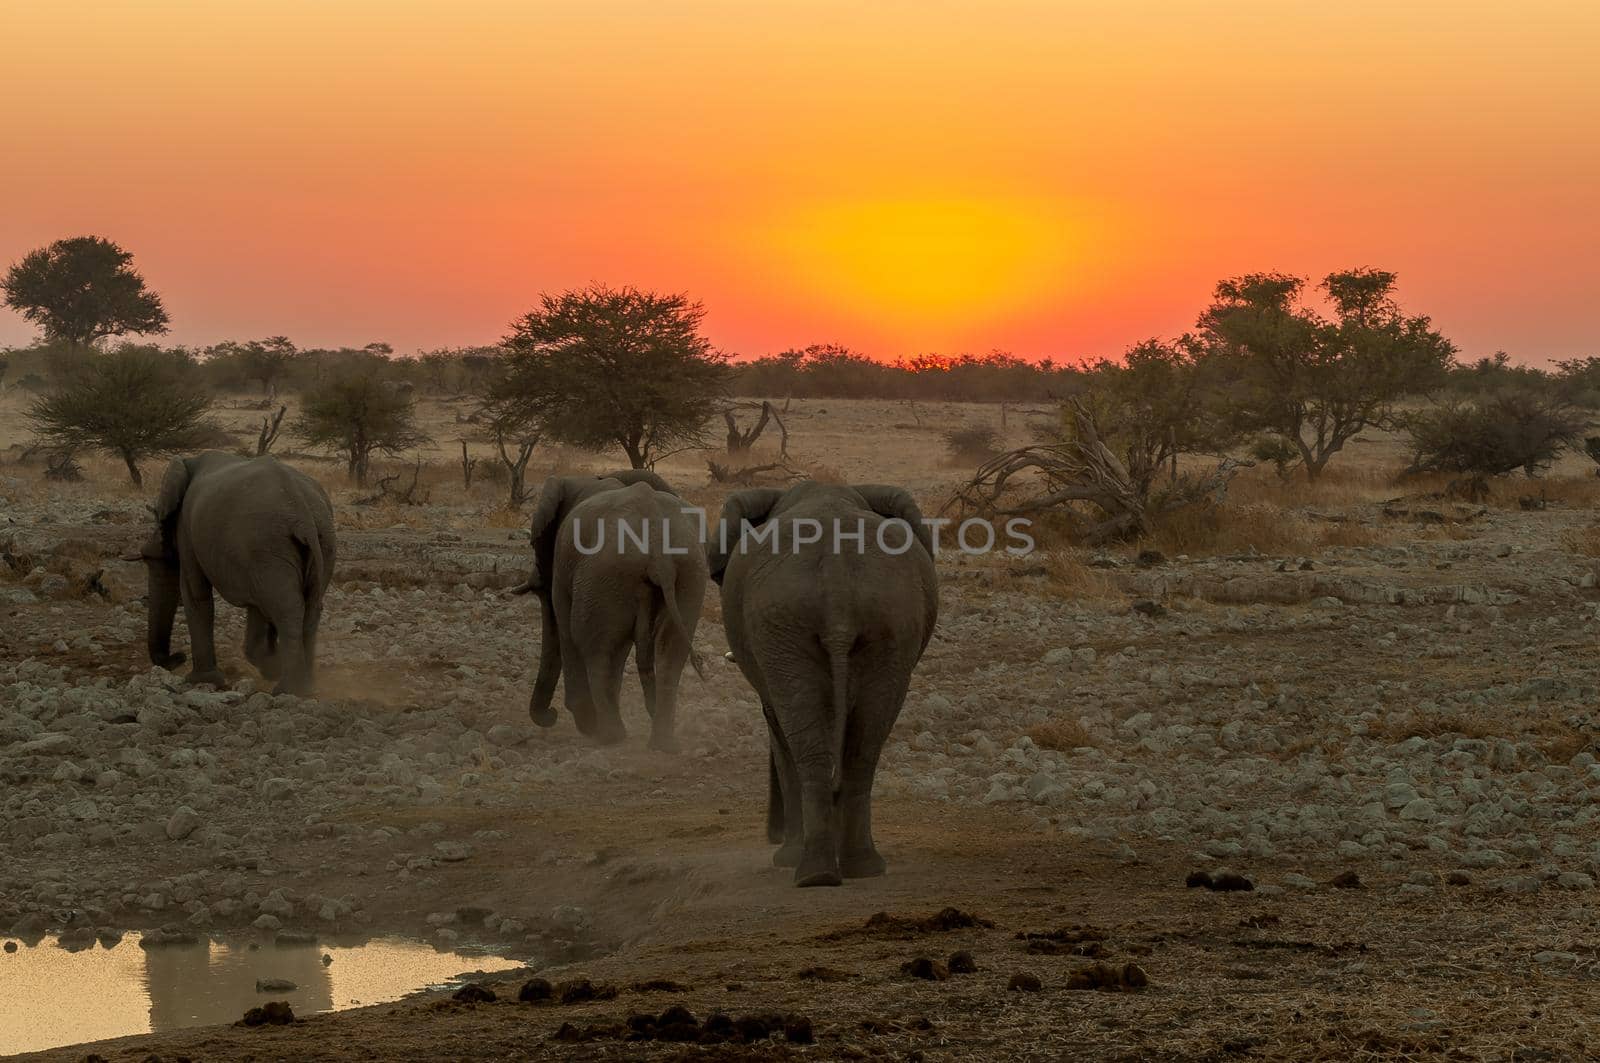 African elephants with sunset backdrop at the Okaukeujo waterhole in northern Namibia